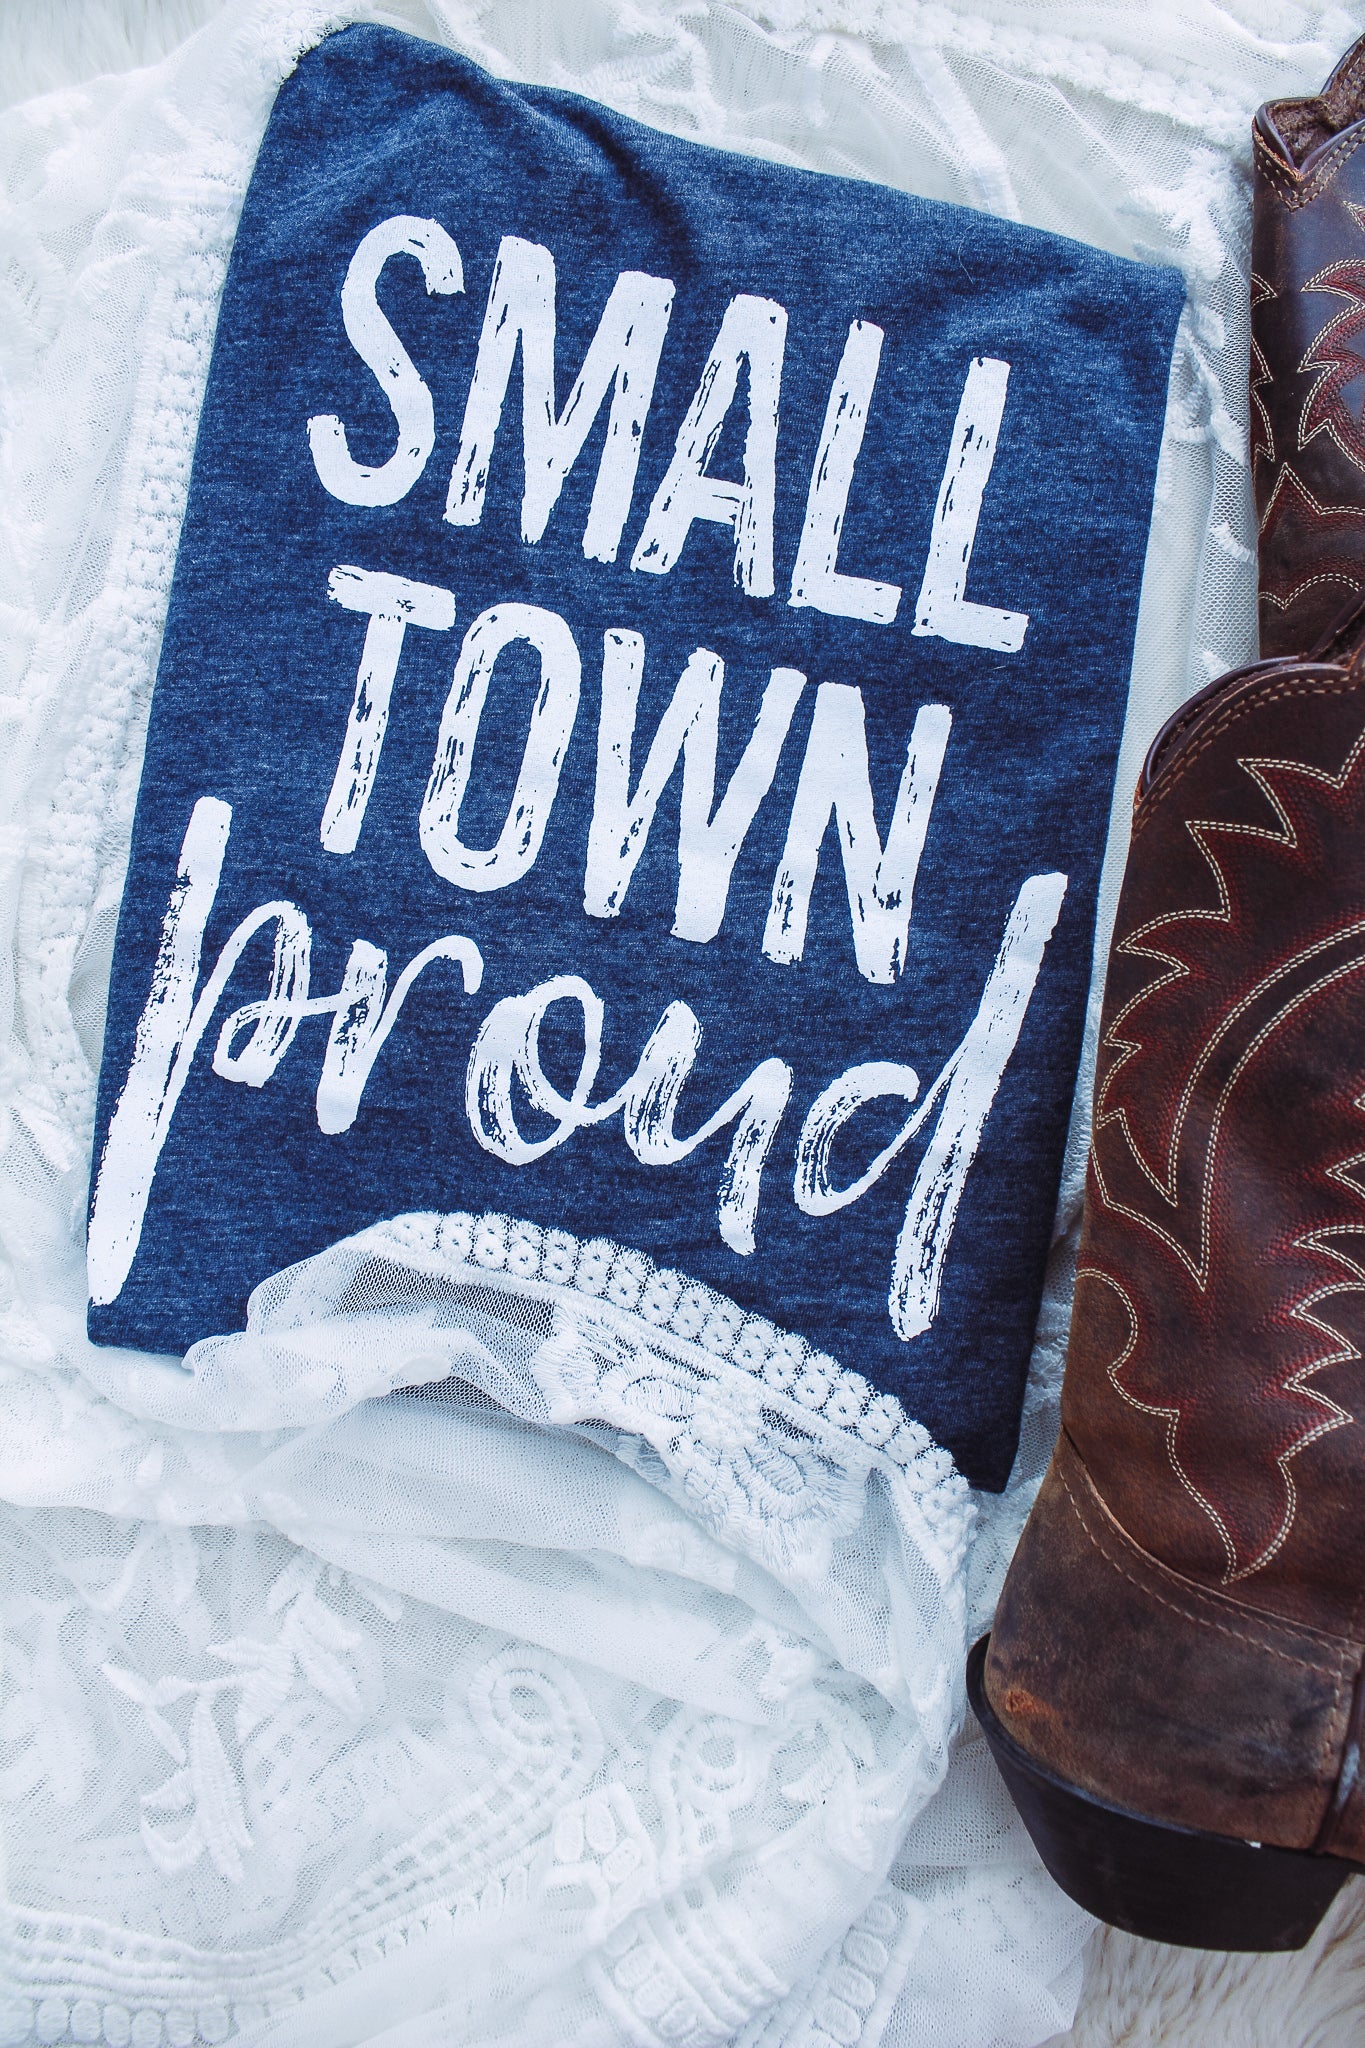 Small Town Proud - Crew Neck T-Shirt